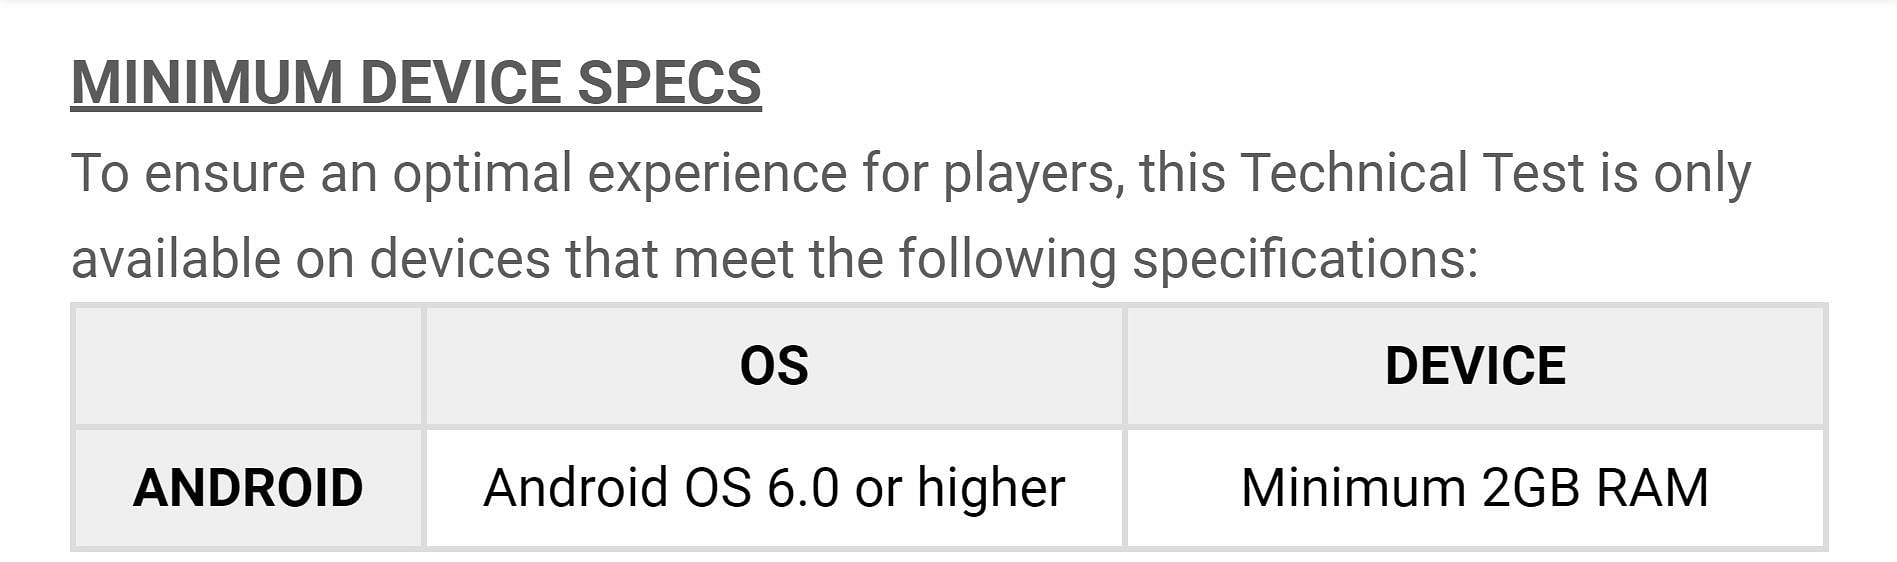 Android minimum device specifications for PUBG New State (Image via PUBG New State)